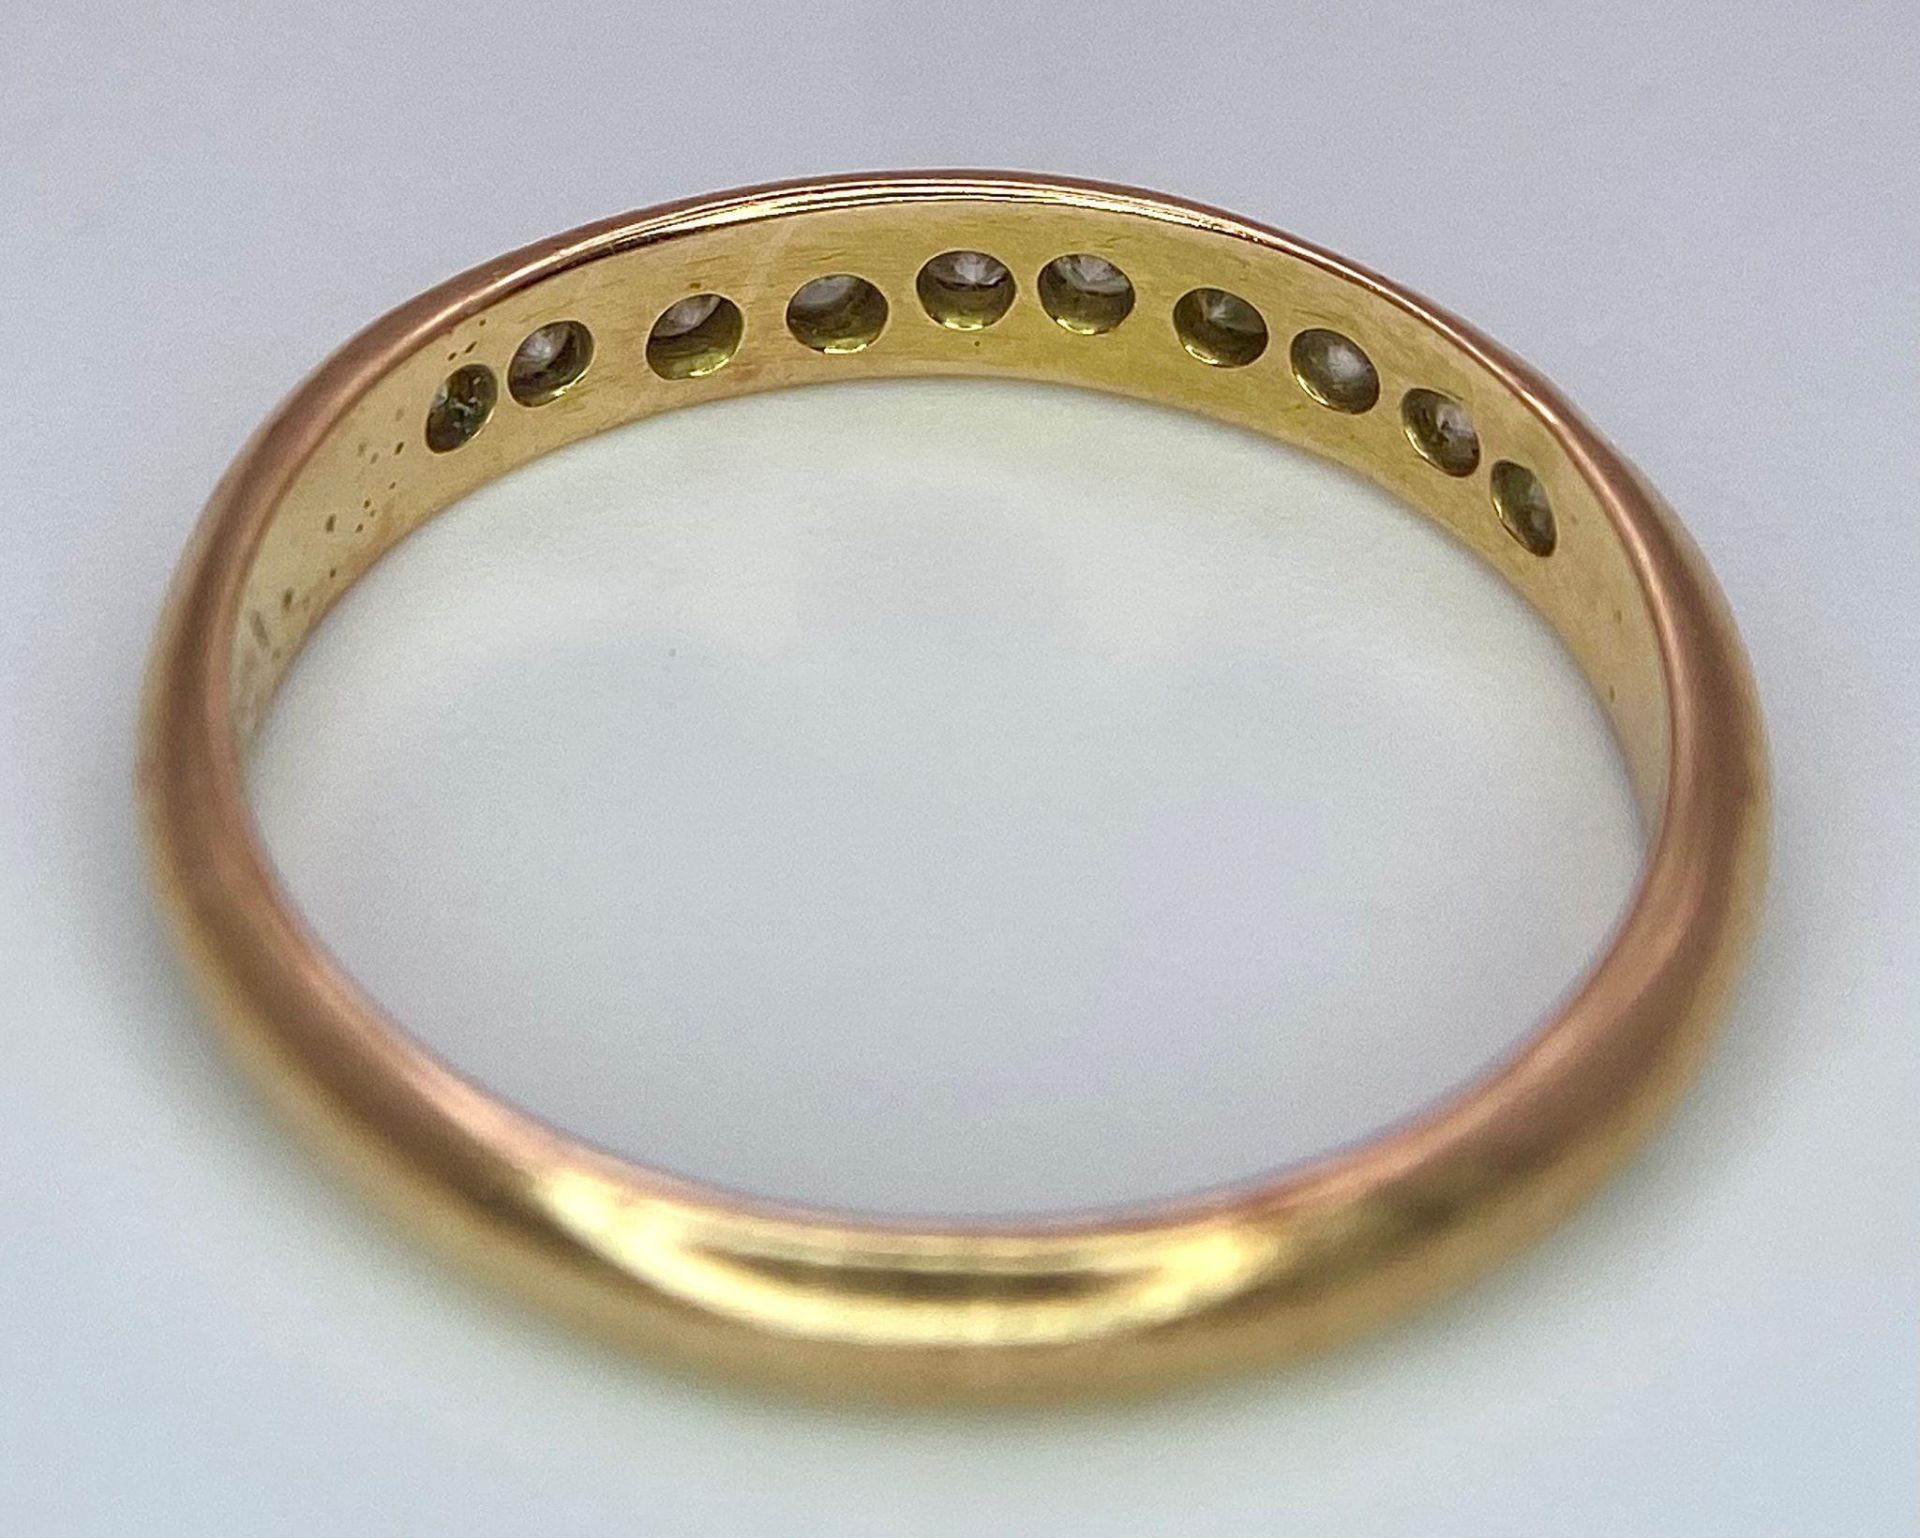 A 14k Yellow Gold Diamond Half Eternity Ring. Size N. 2.1g total weight. - Image 5 of 6